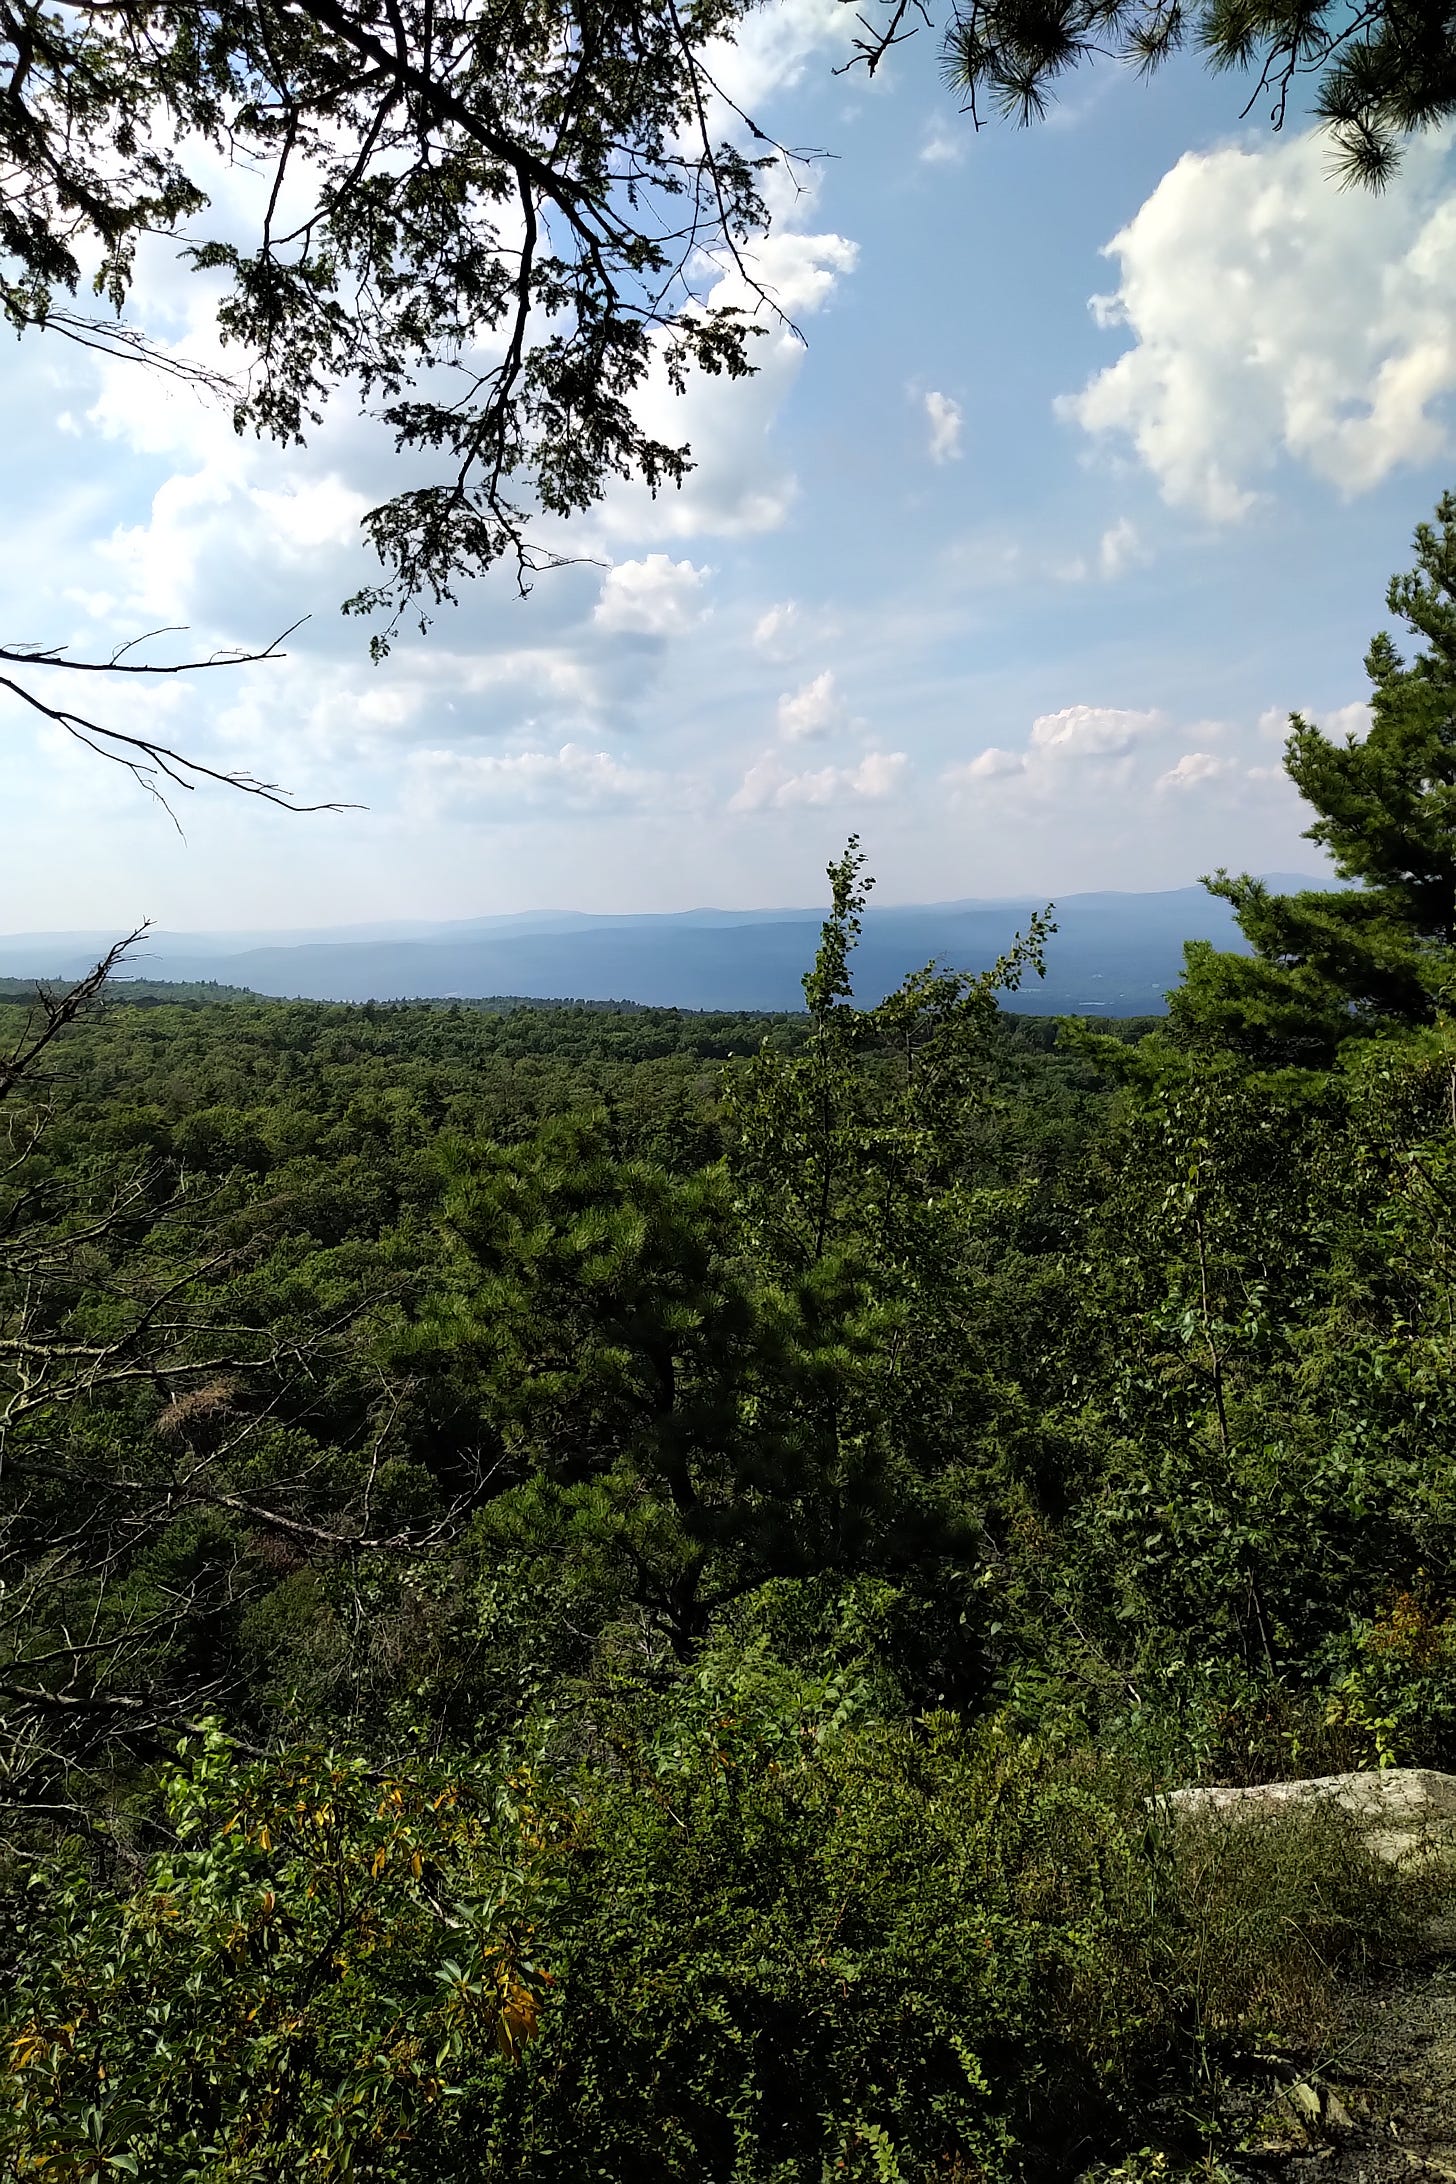 A summer view across a valley, framed by tree branches, in the Mohonk Preserve.